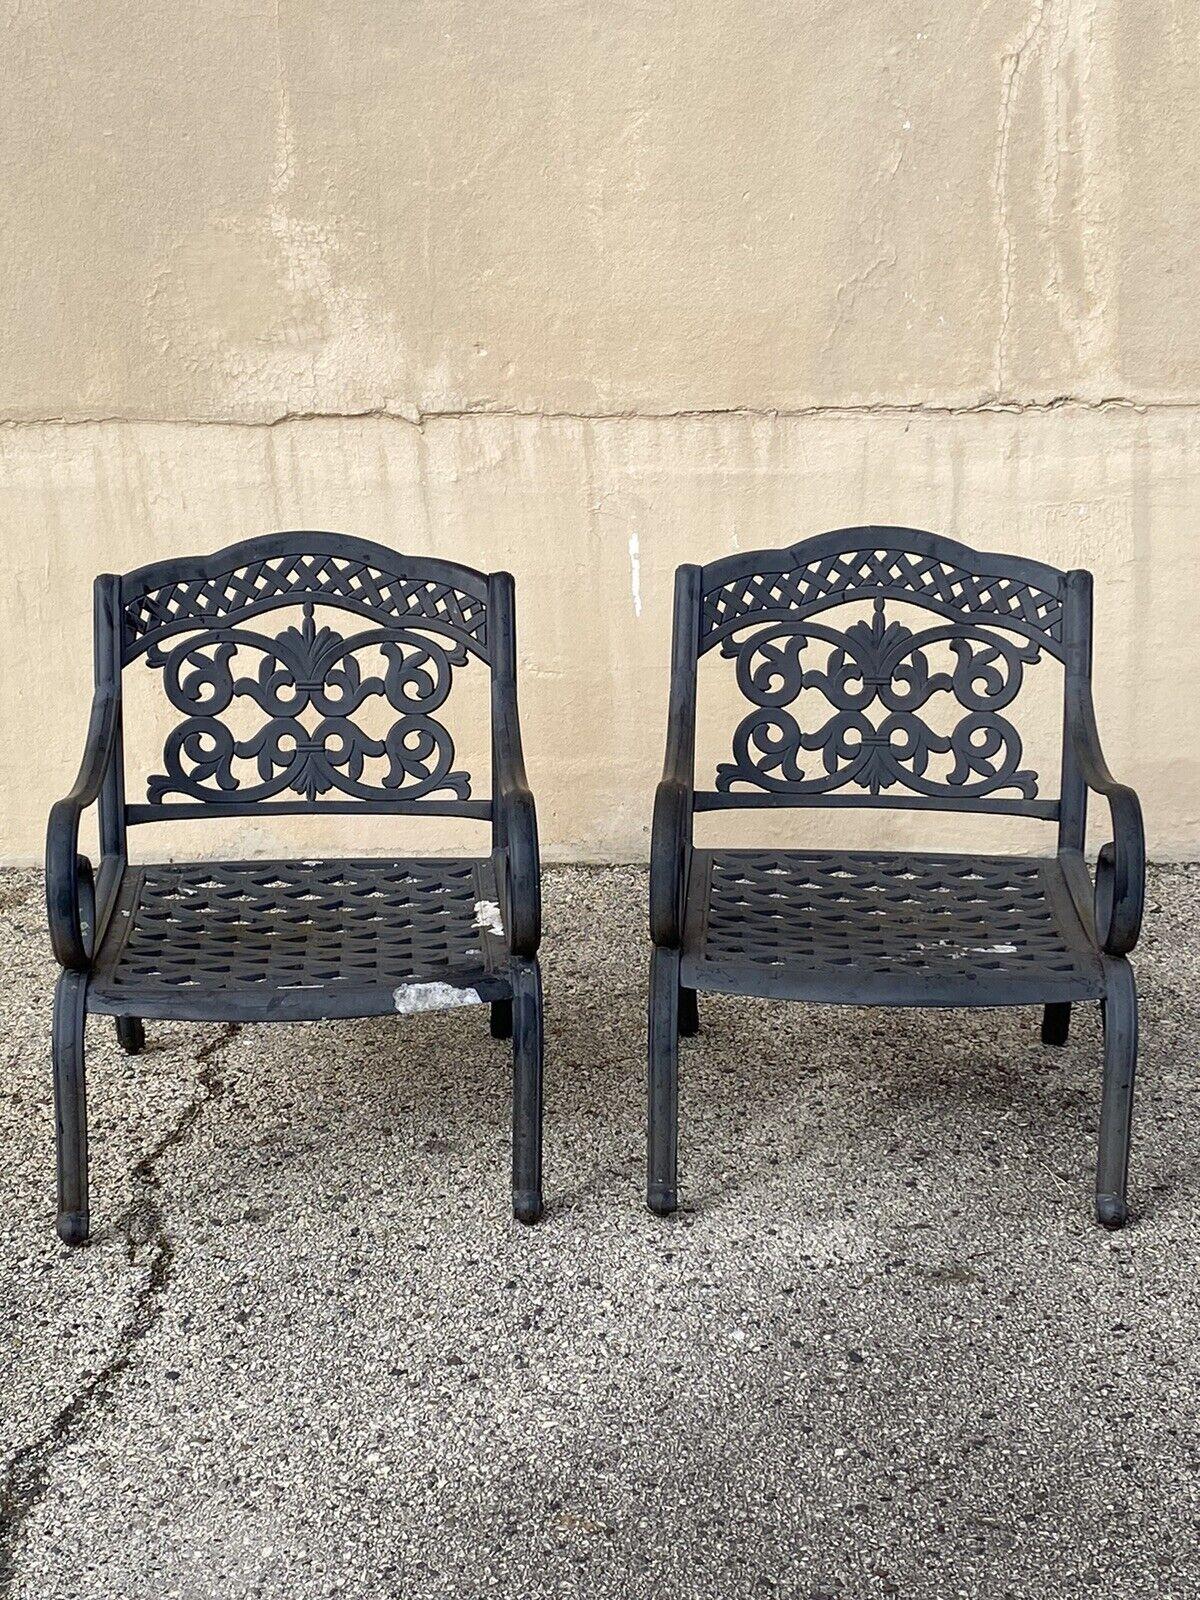 Cast Aluminum Mediterranean Tuscan Style Scrolling Garden Patio Club Lounge Chairs - a Pair. Item features 21st Century, Pre-owned
Measurements: 34